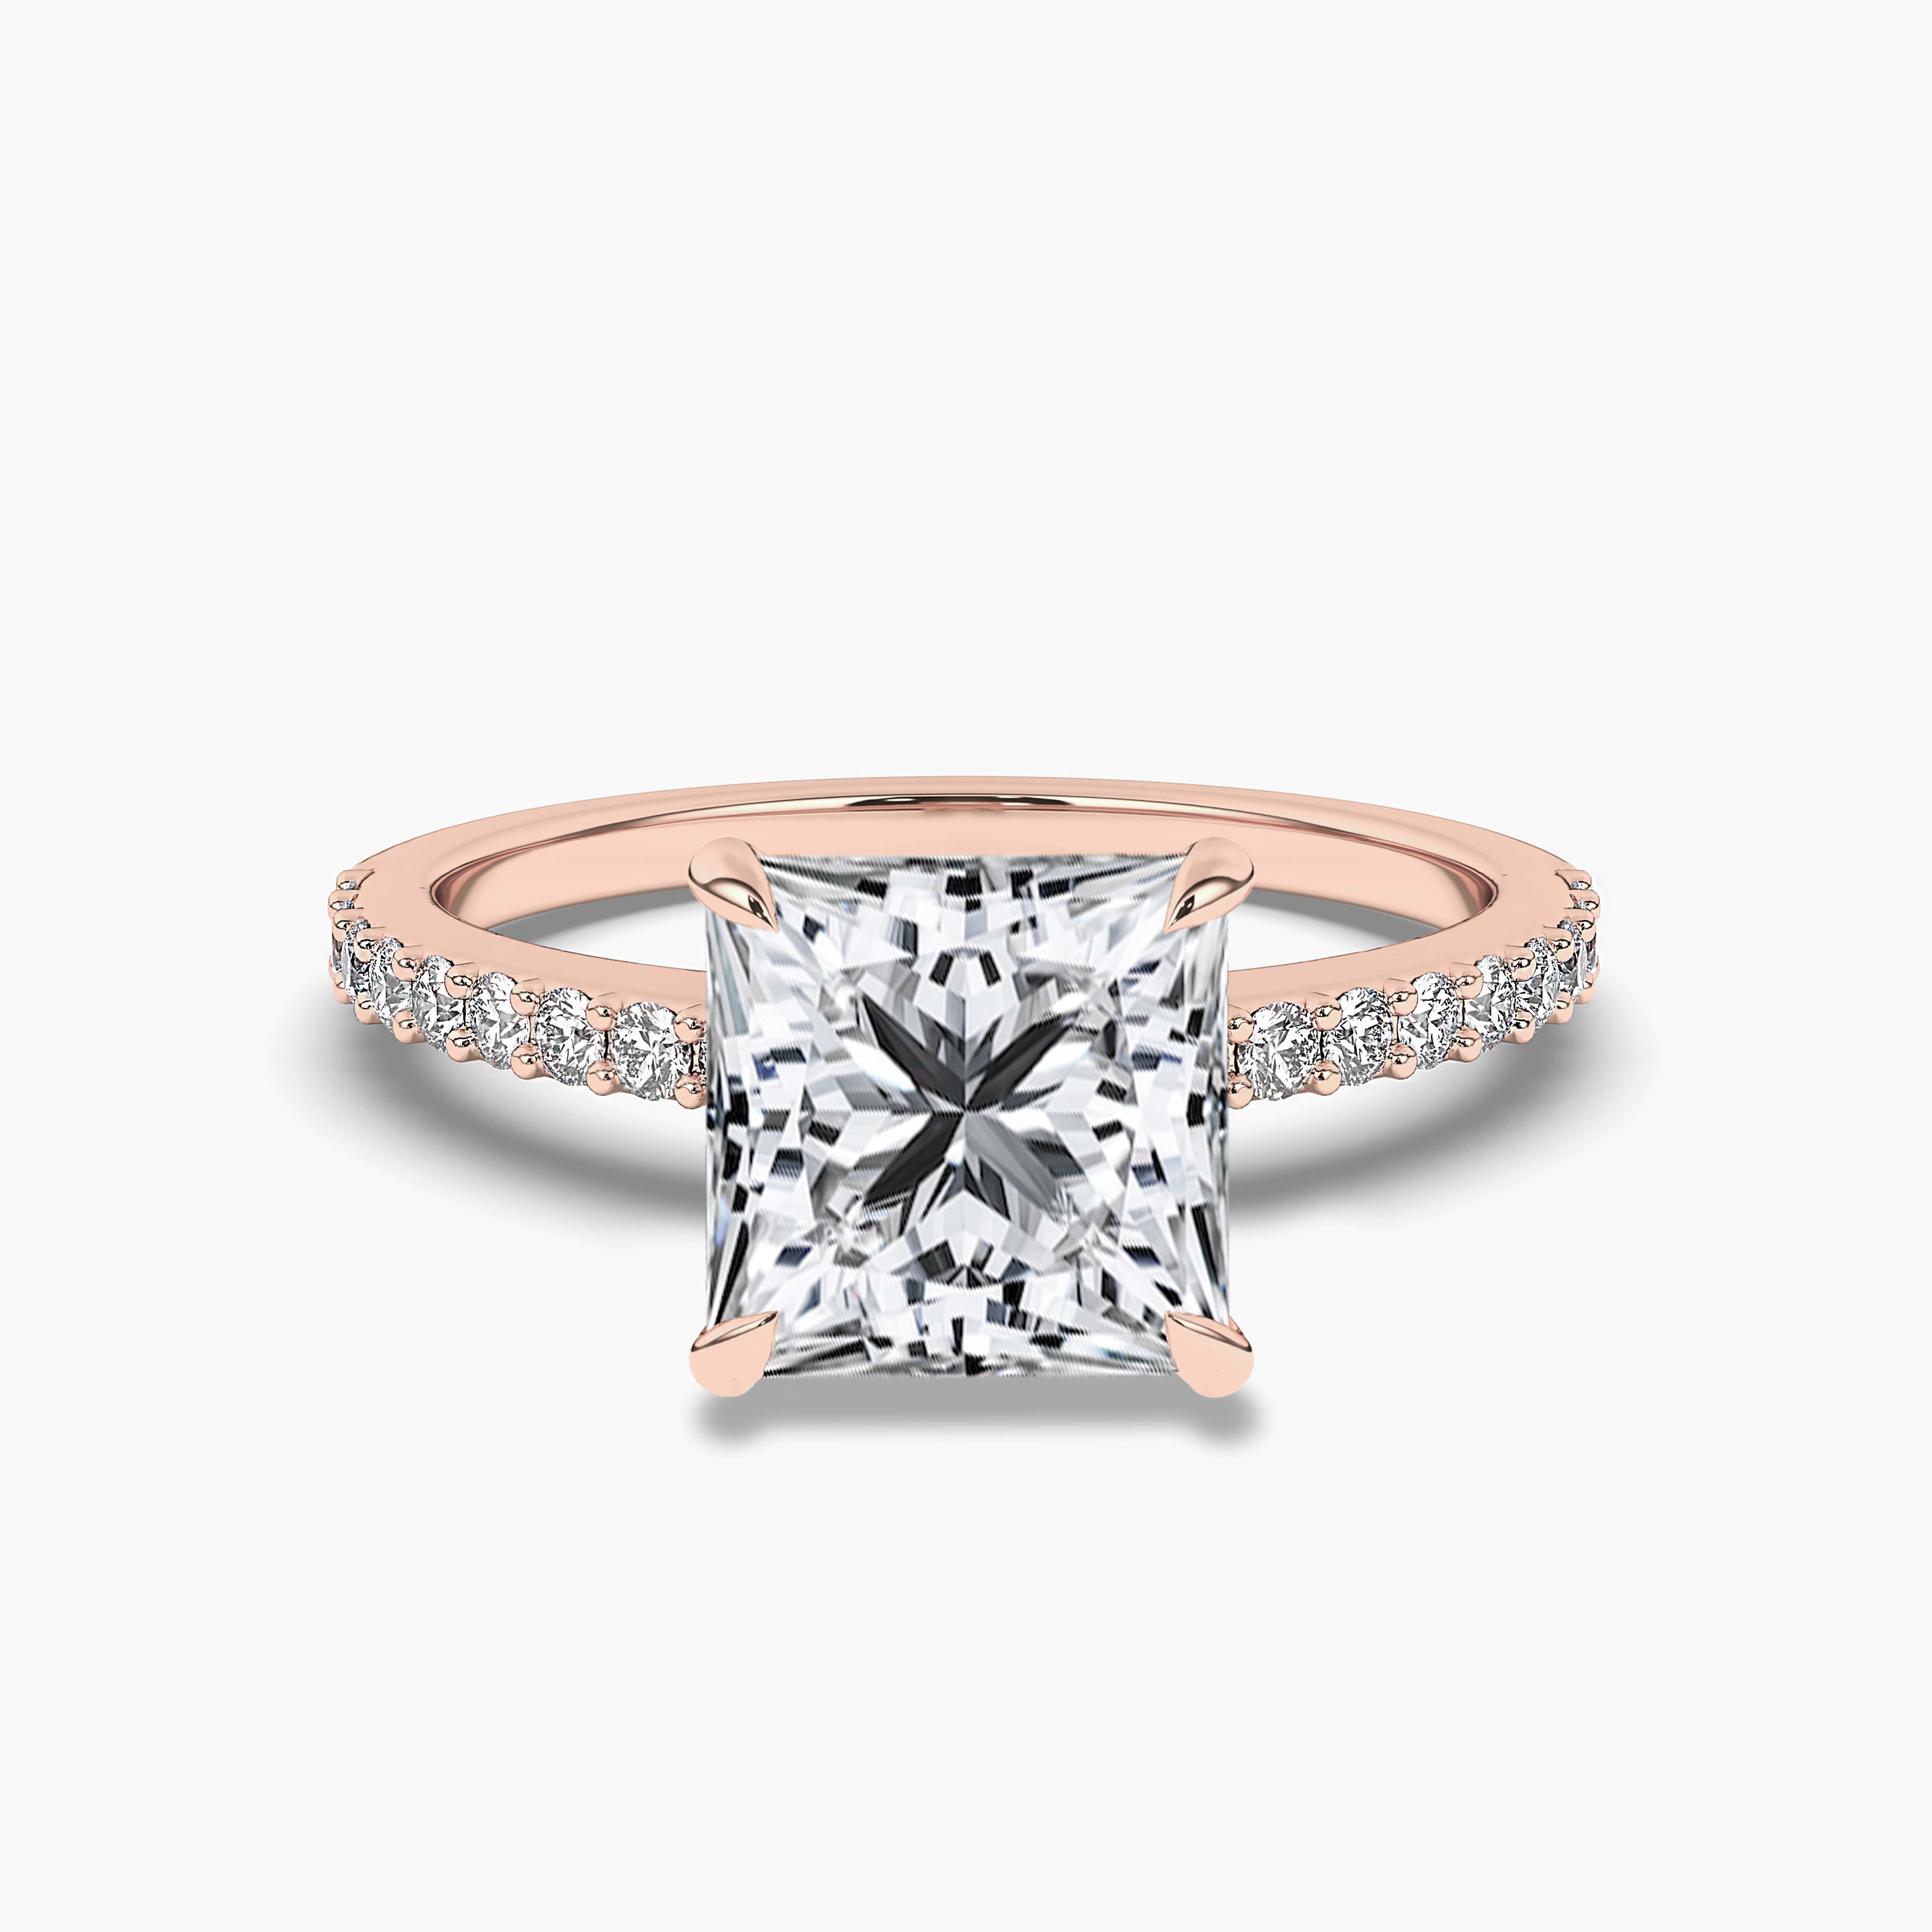 Princess Cut Rose Gold Solitaire engagement ring with Pave Diamonds